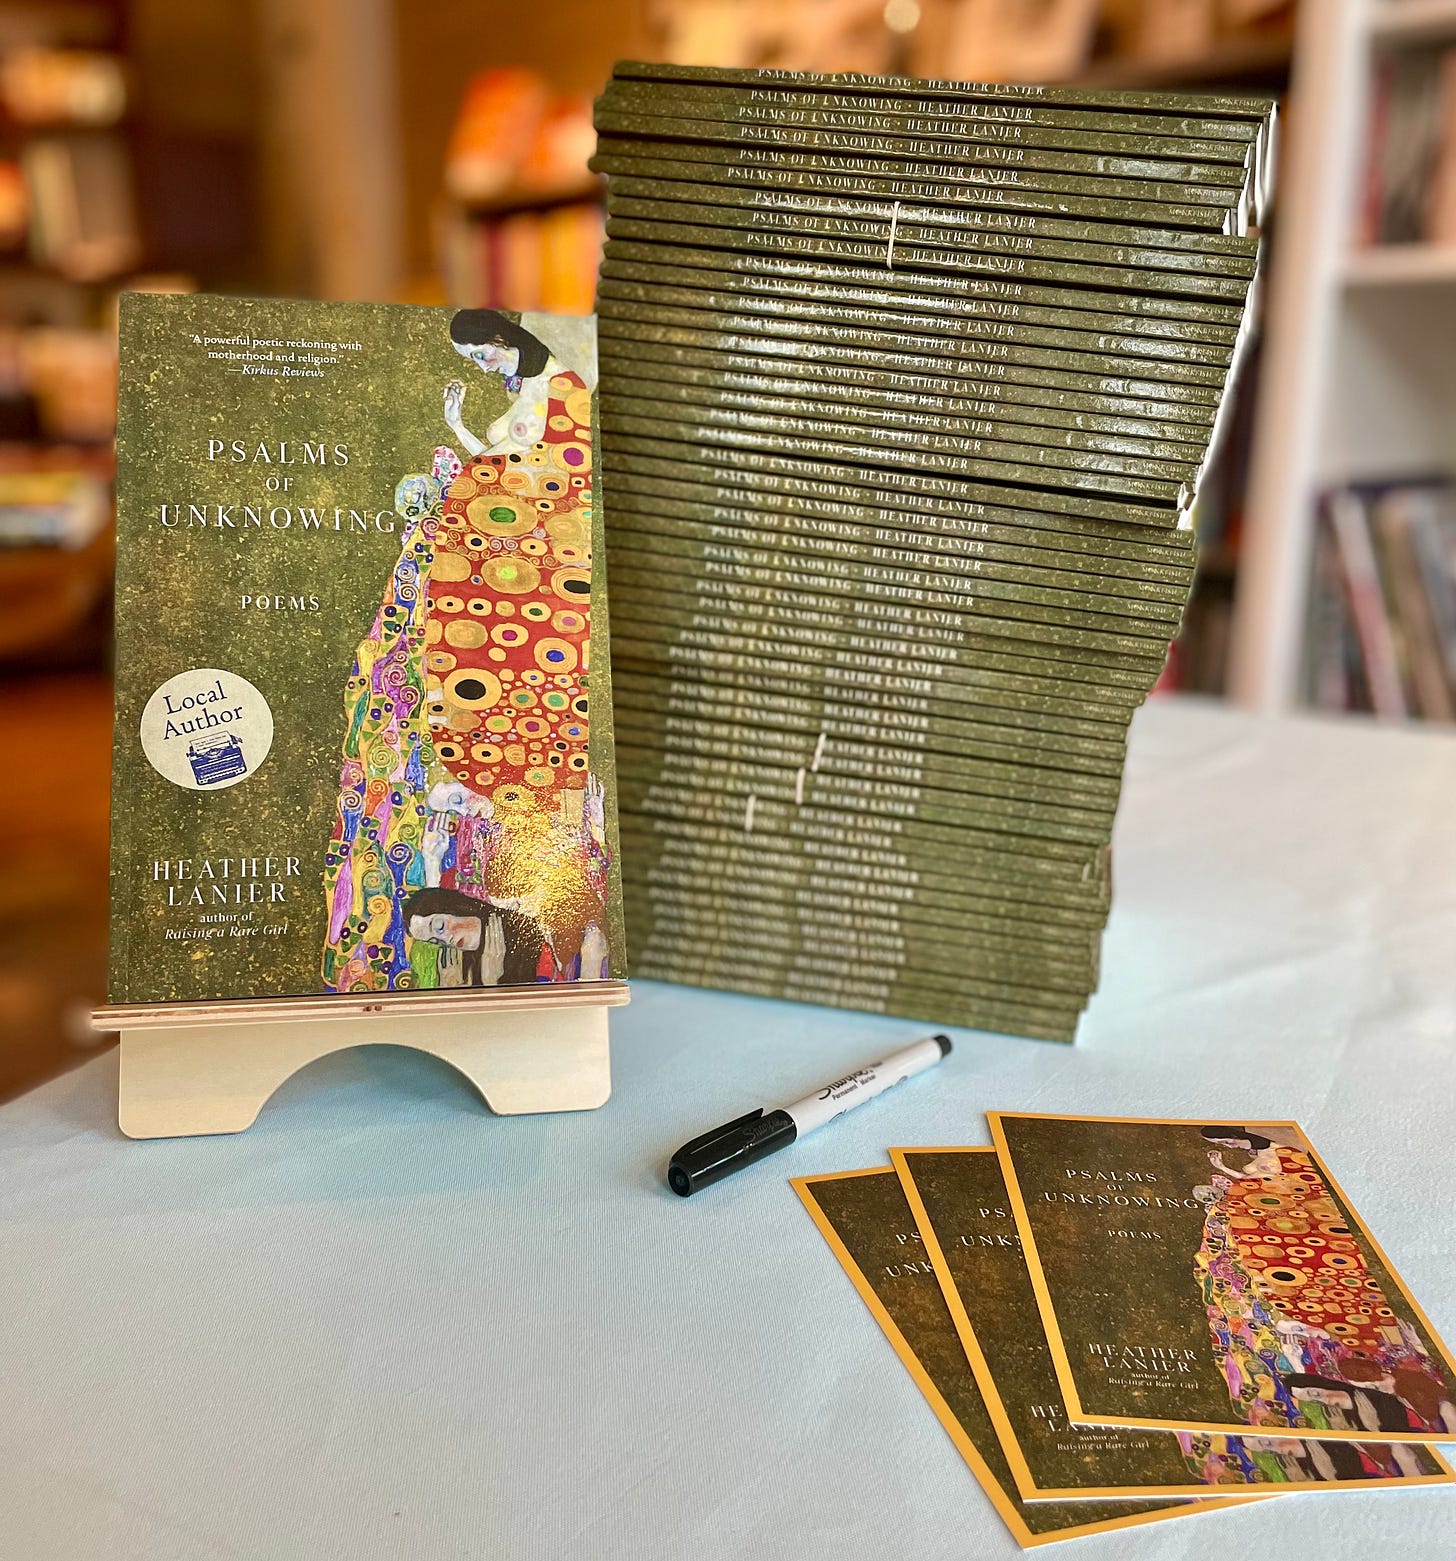 Table featuring a copy of Psalms of Unknowing, which features Klimt's HOPE II. Beside the book is a stack of 30 or so books with a green spine. In front of that stack are postcards with the same book cover displayed on the front, beside a pen.